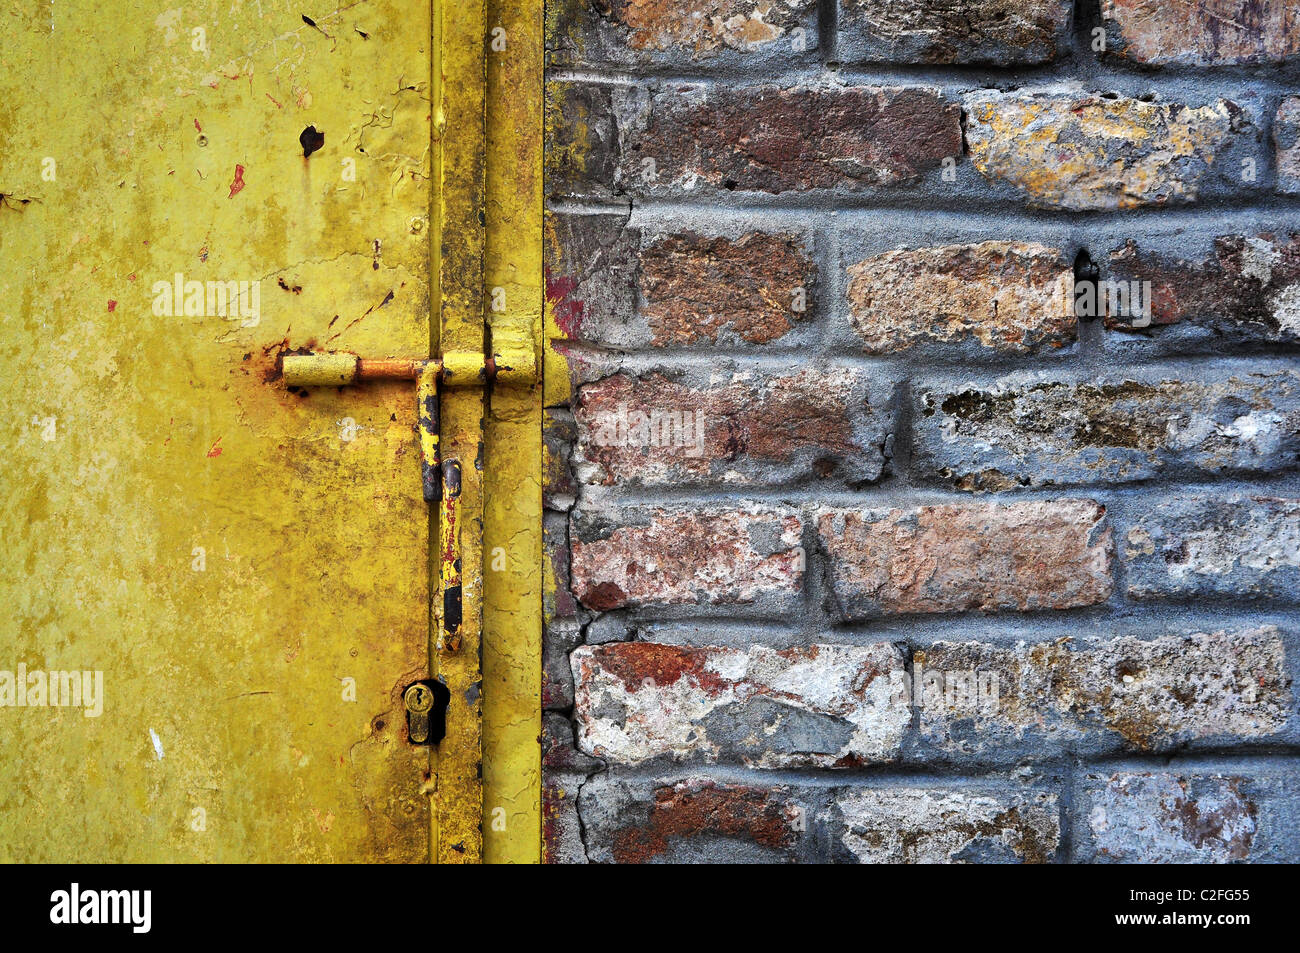 Old grunge metal doors and a brickwall detail. Stock Photo